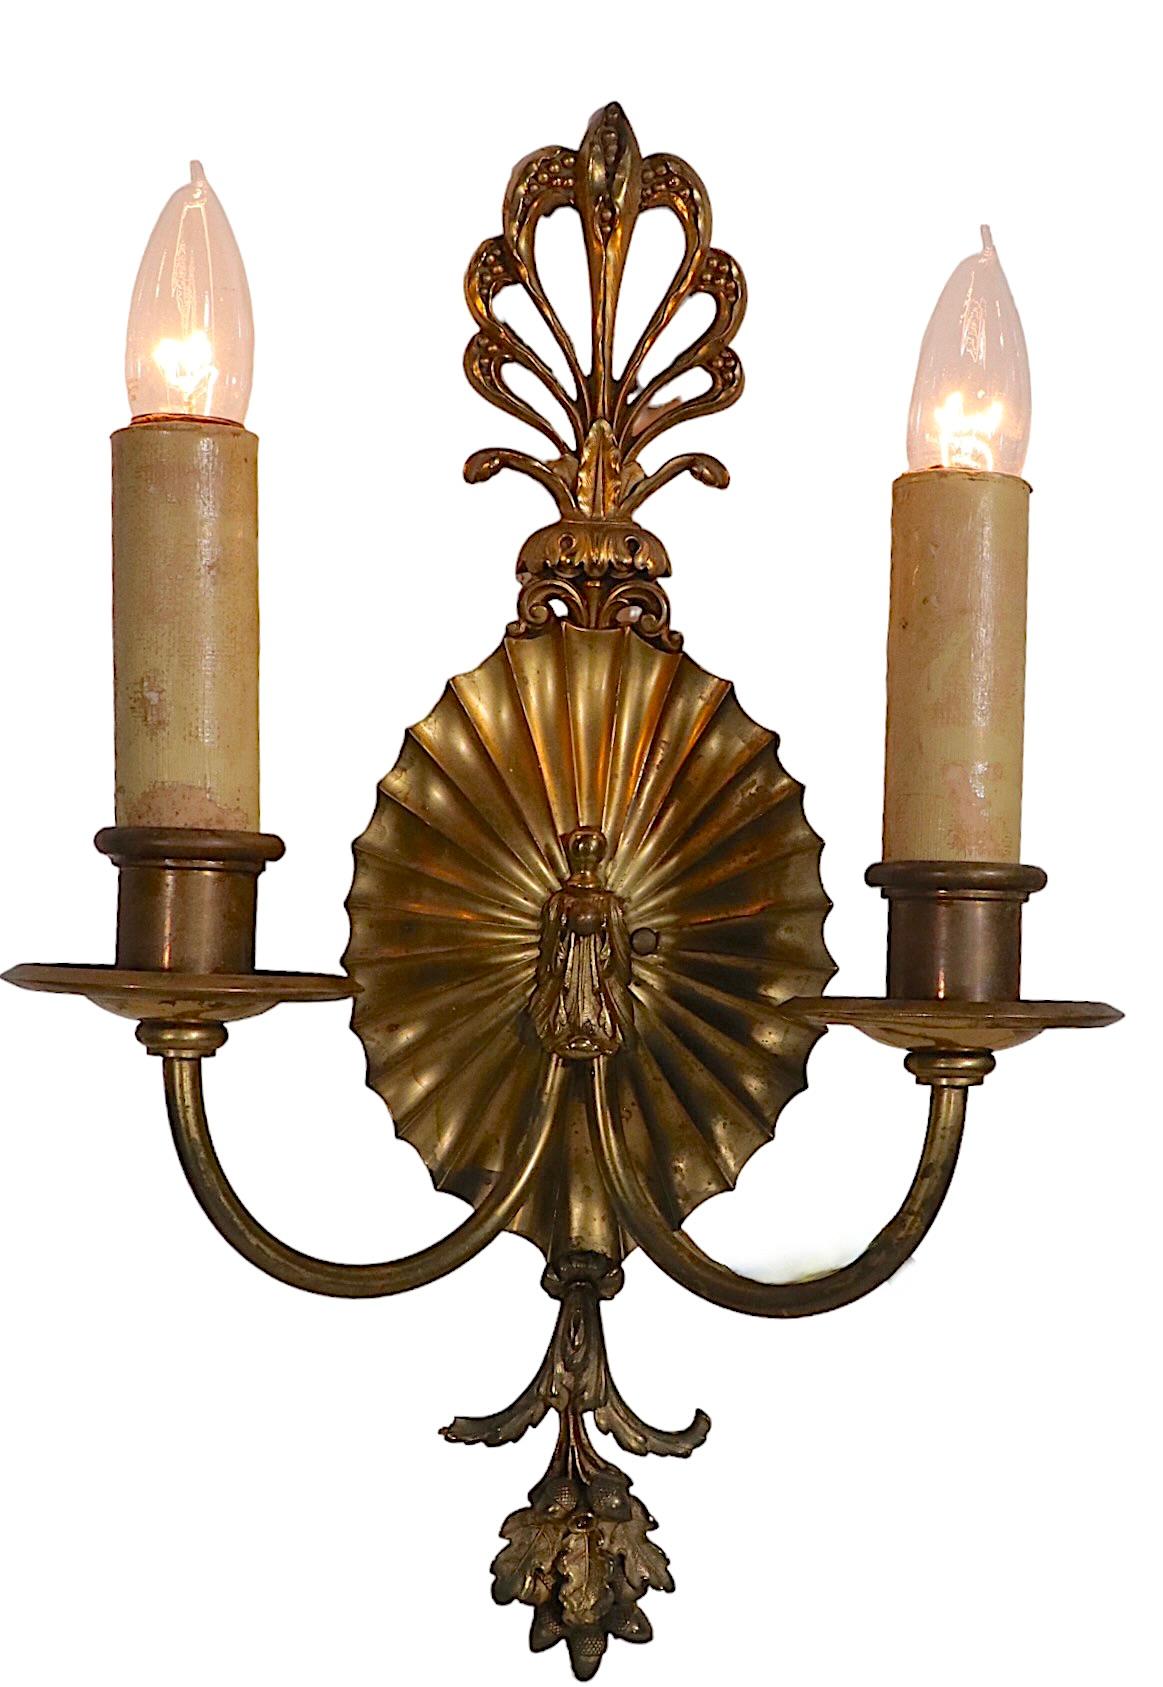 Neoclassical Revival Pr. Classical Brass Wall Sconces by Caldwell C 1900/ 1920’s